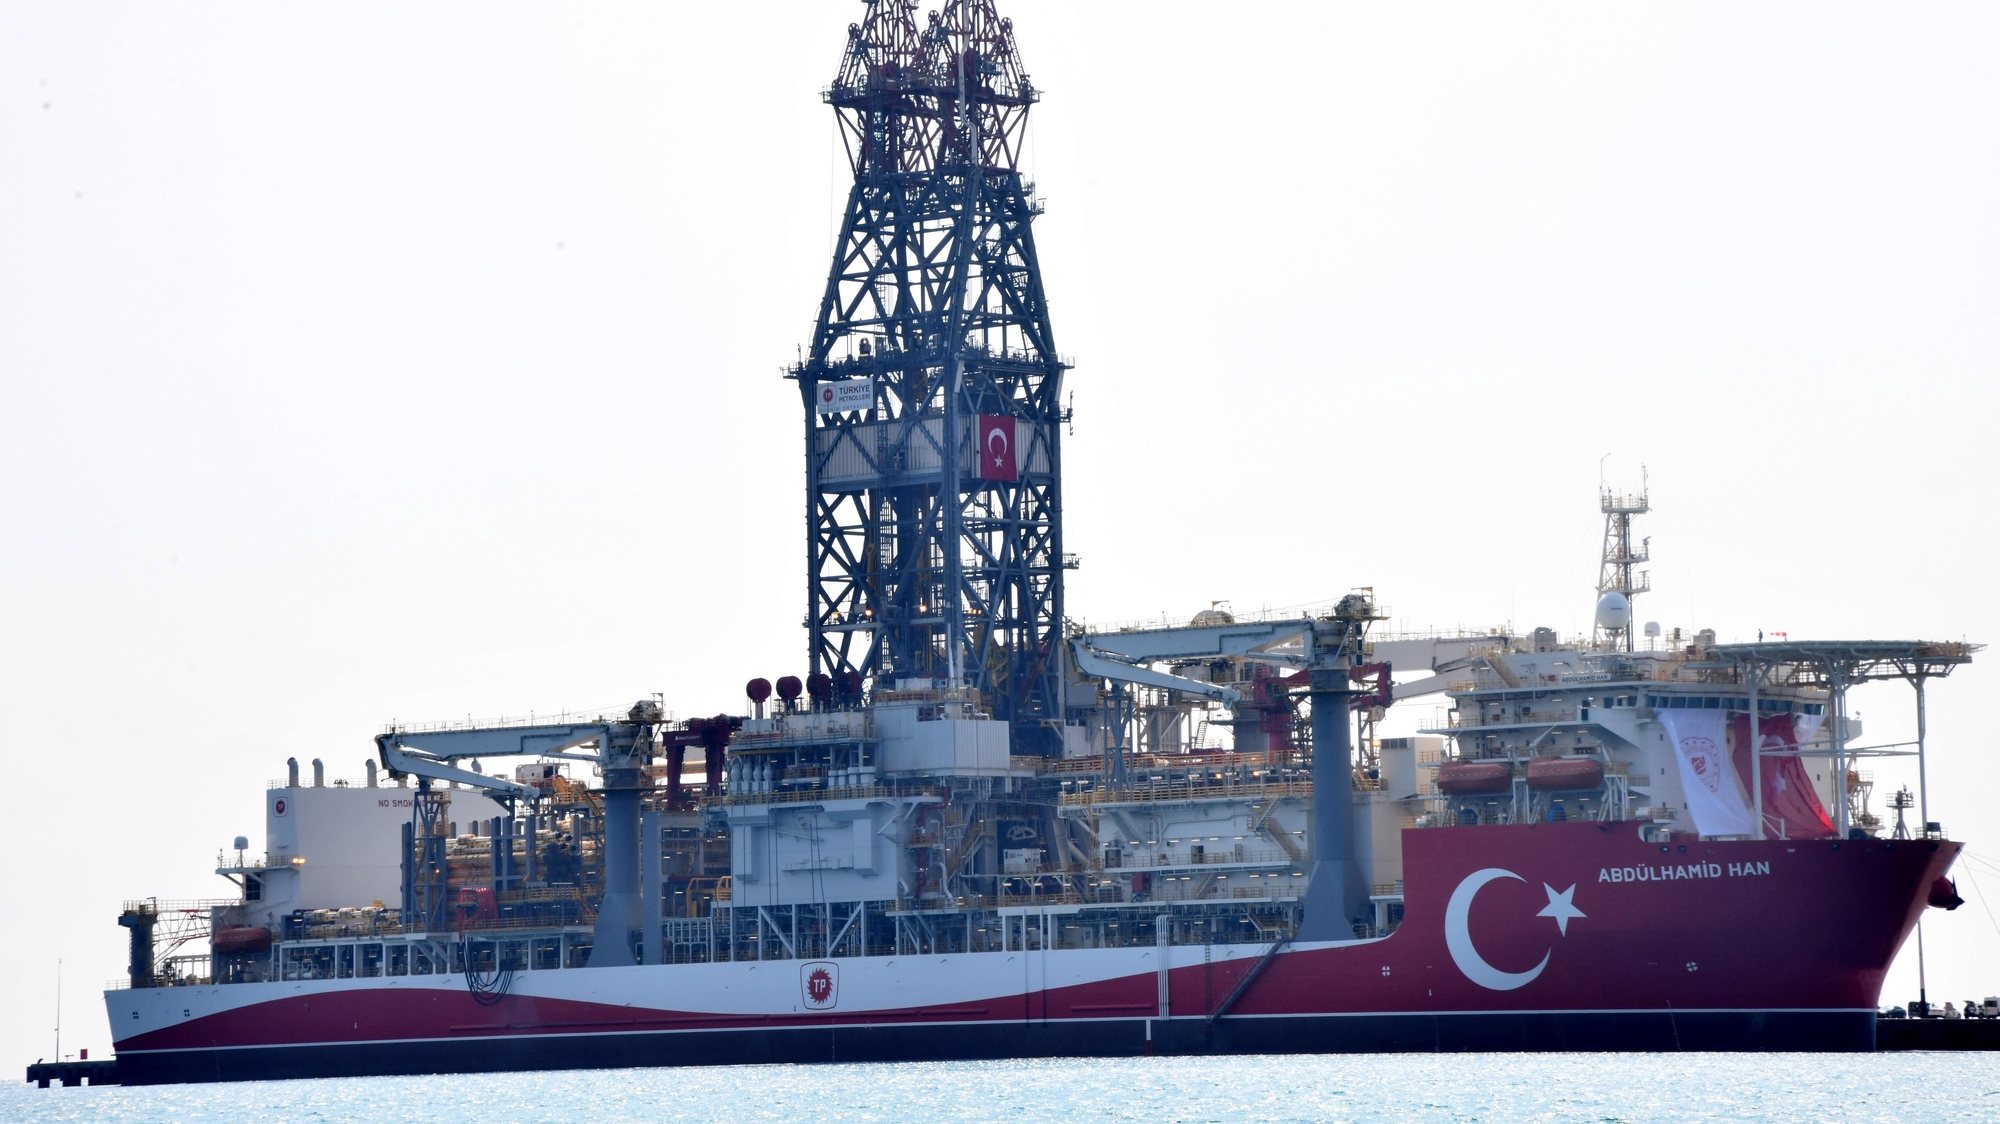 epa10112442 The Turkish drilling vessel Abdulhamid Han is seen at the Tasucu Port during a ceremony of first mission in Mersin, Turkey, 09 August 2022. Turkish forth drillship Abdulhamid Han is 238 meters (780 feet) long, 42 meters (137 ft) wide and 68,000 gross tons weighs also with a maximum drilling depth of 12,200 meters (40,026 ft). The ship will join a fleet of three ships for hydrocarbon exploration as a first mission at the Mediterranean.  EPA/STR